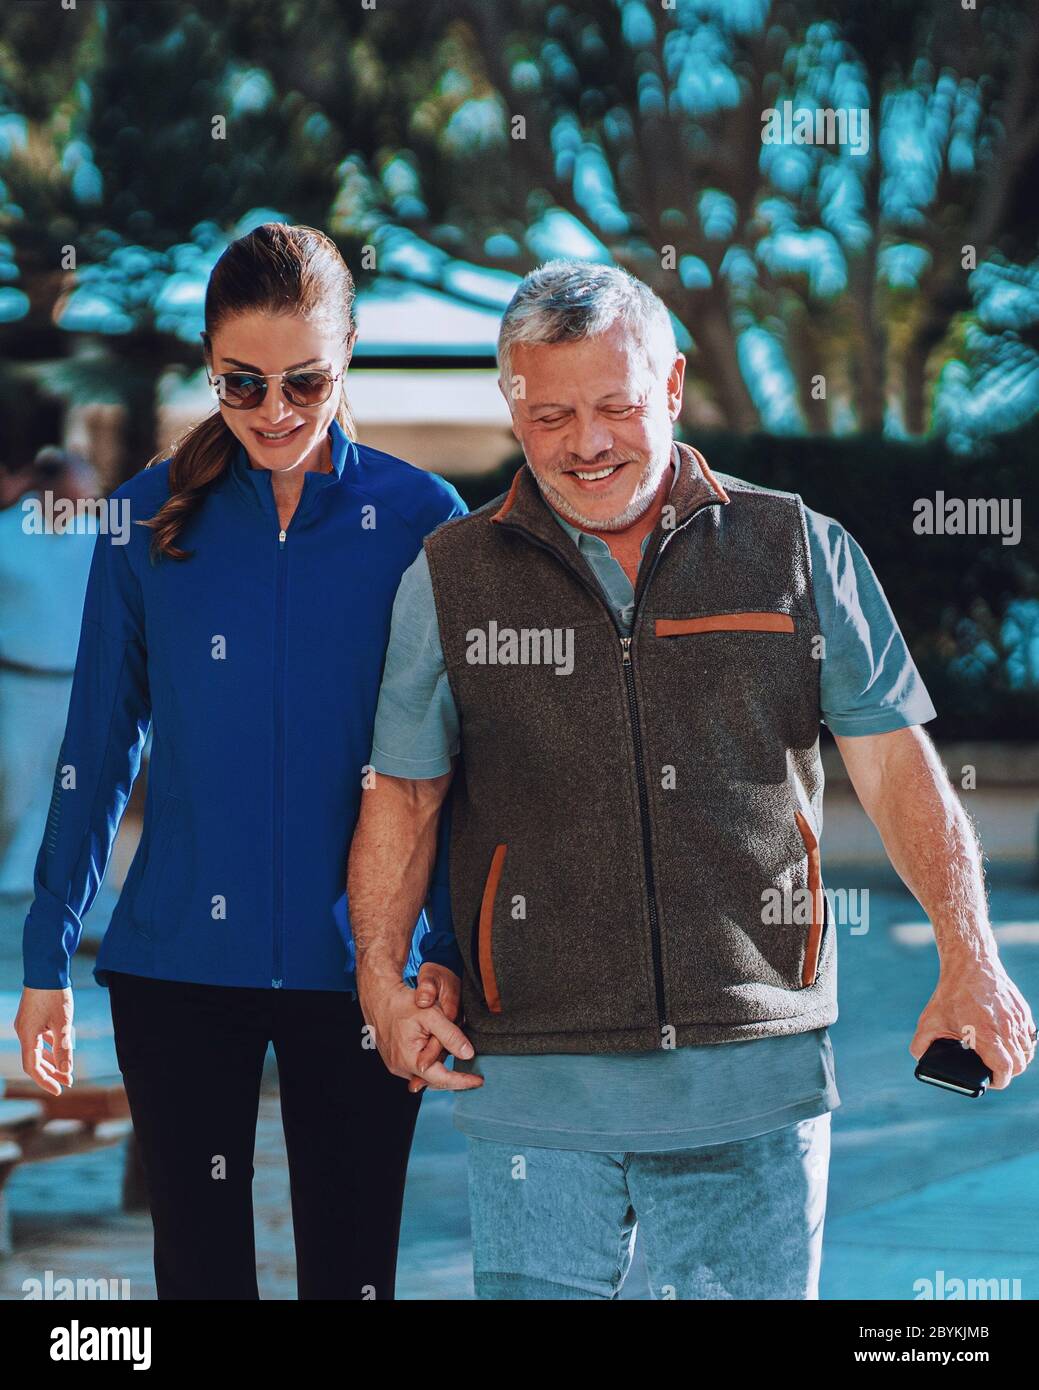 HM Queen Rania Al Abdullah shared a photo on her official Instagram account  today to mark her wedding anniversary with HM King Abdullah II, captioned:  "How could you not fall in love